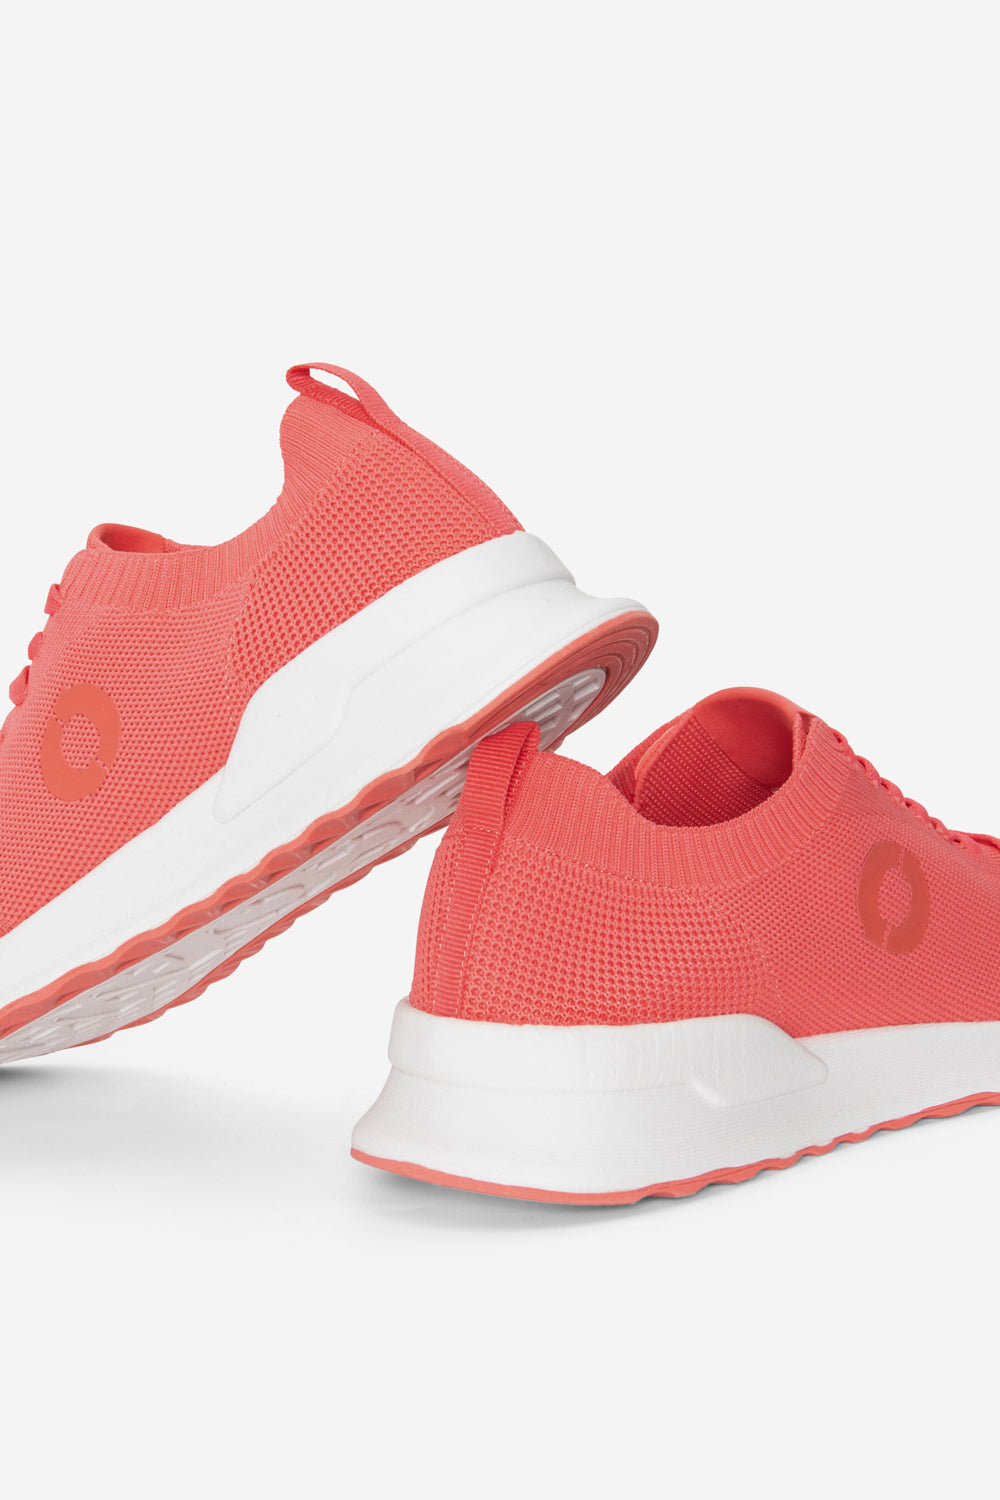 PRINCE KNIT TRAINERS CORAL